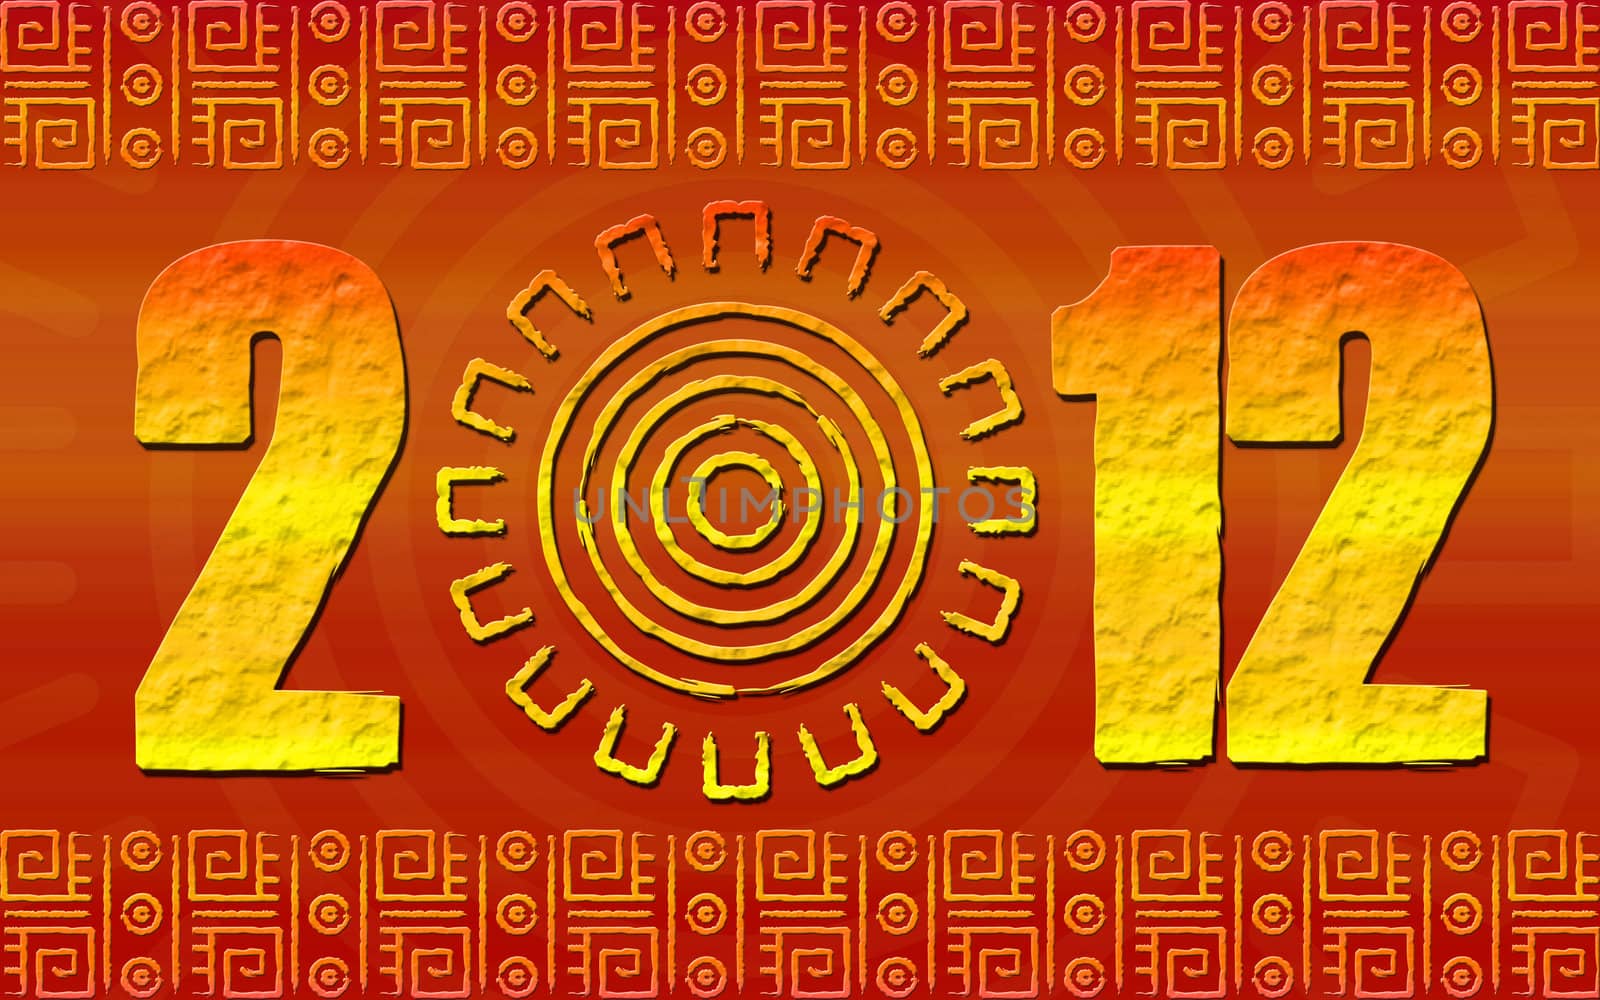 We see art illustration of 2012 year with ancient glyphs maya